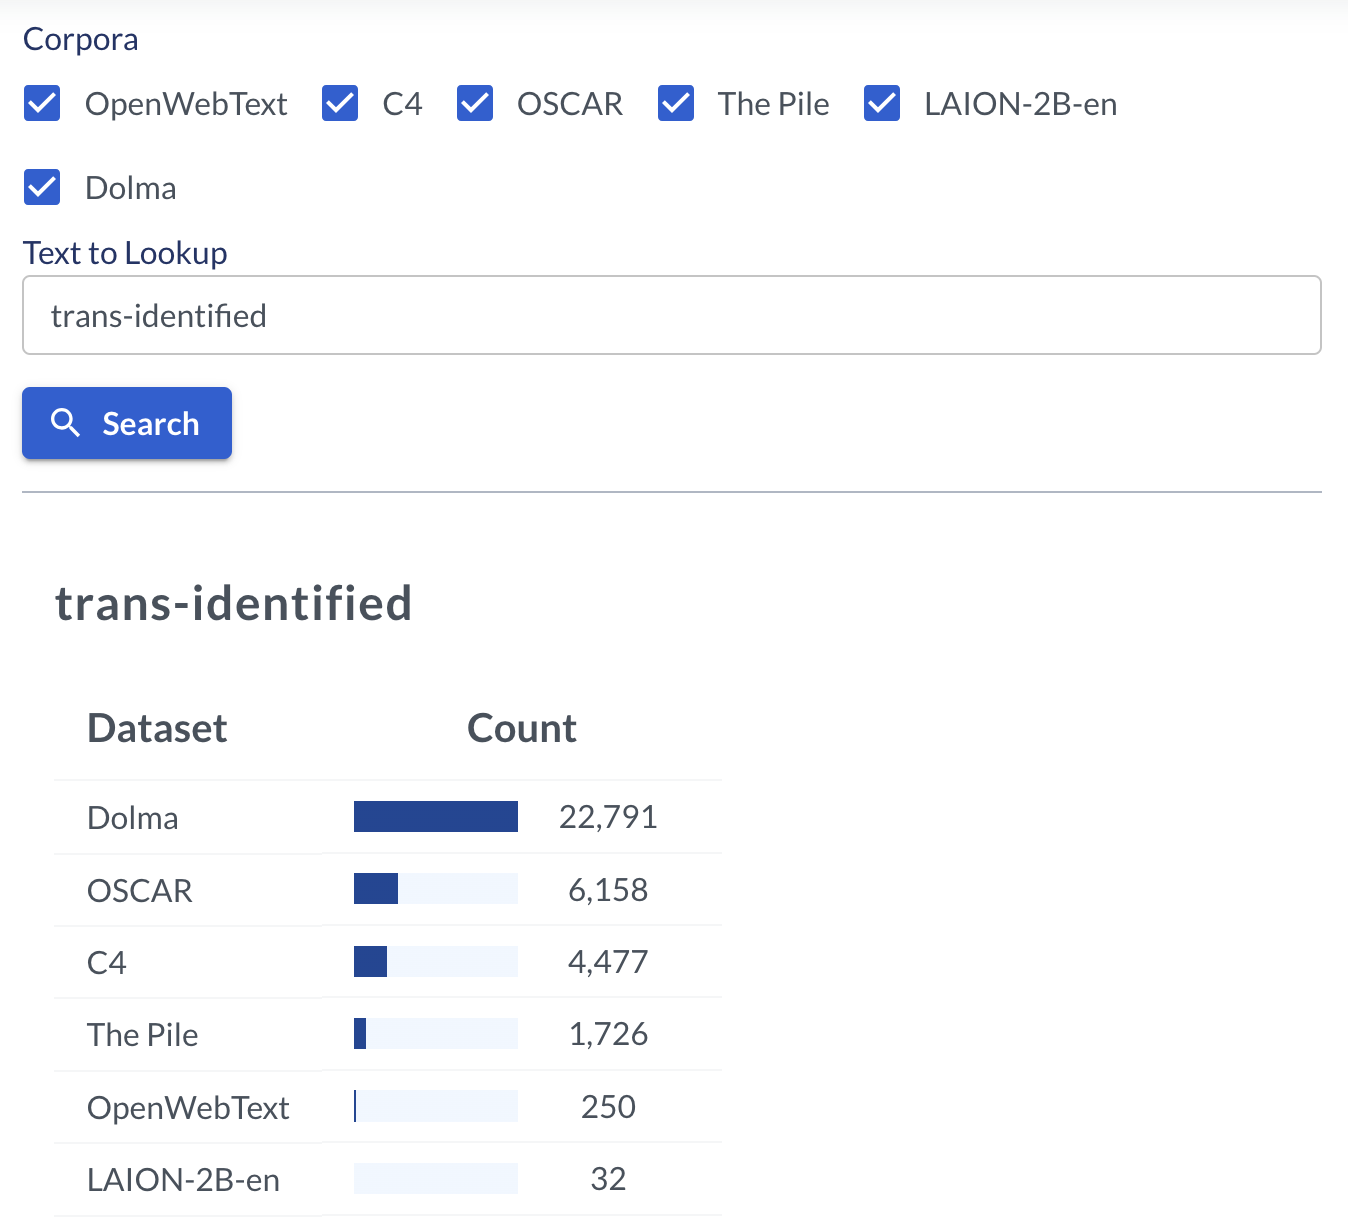 A screenshot of a search using the WIMBD API over the OpenWebText, C4, OSCAR, The Pile, LAION and Dolma data sets showing the number of times the phrase 'trans identified' appears.